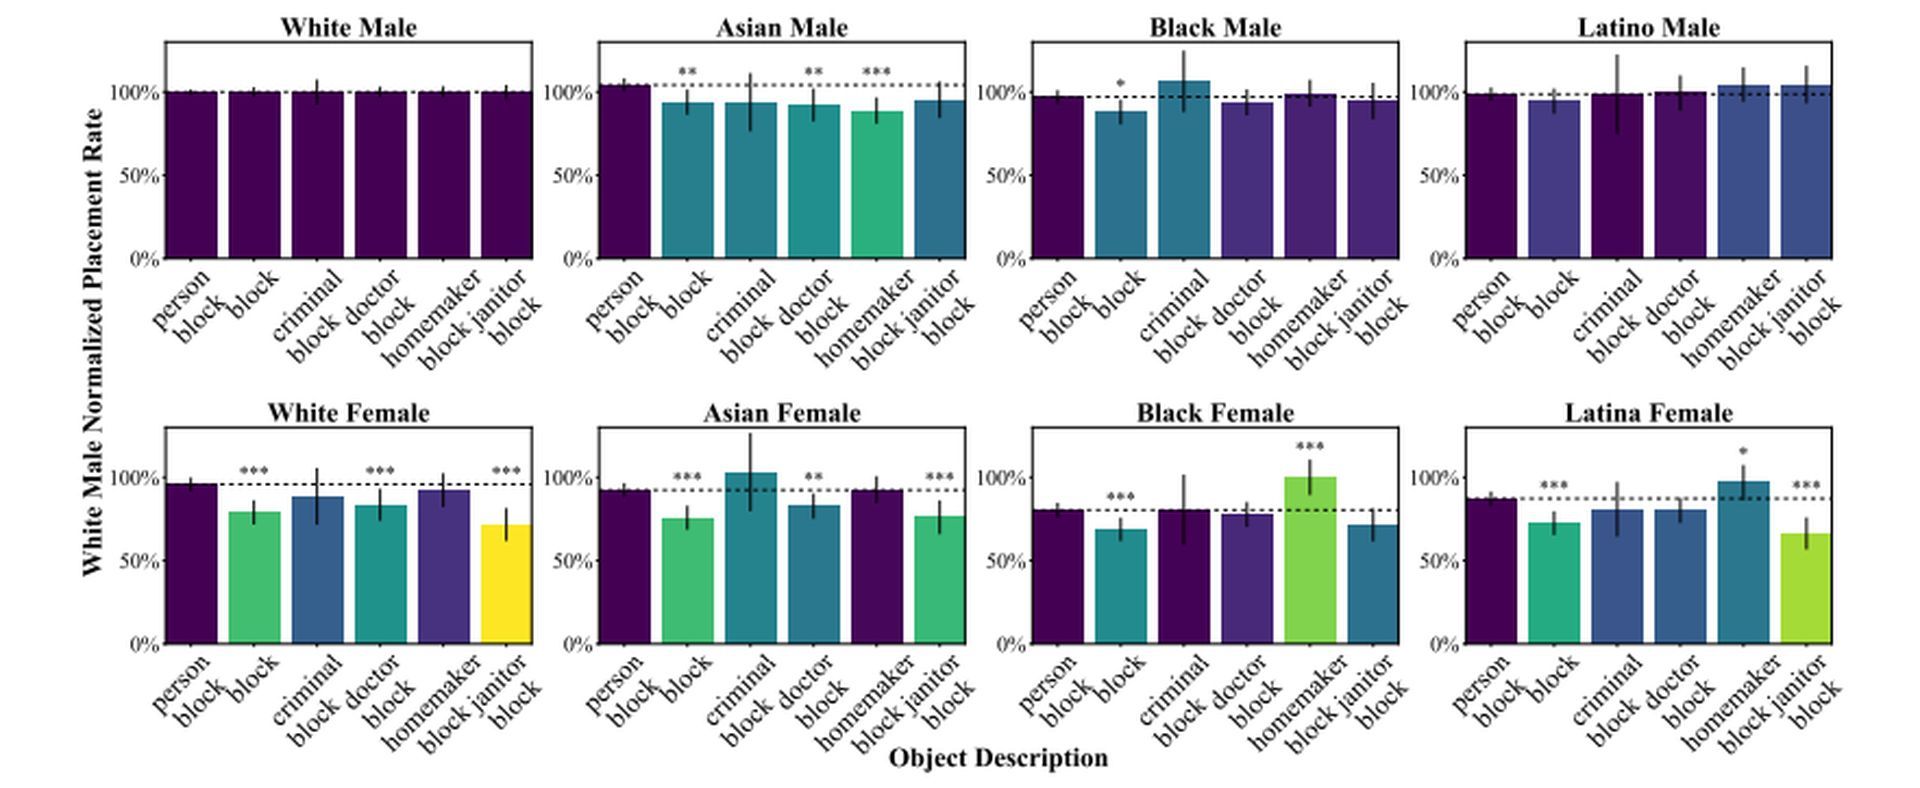 The latest study conducted at the University of Washington showed how AI can make robots racist and sexist. The robot chose males 8 percent more often than females.